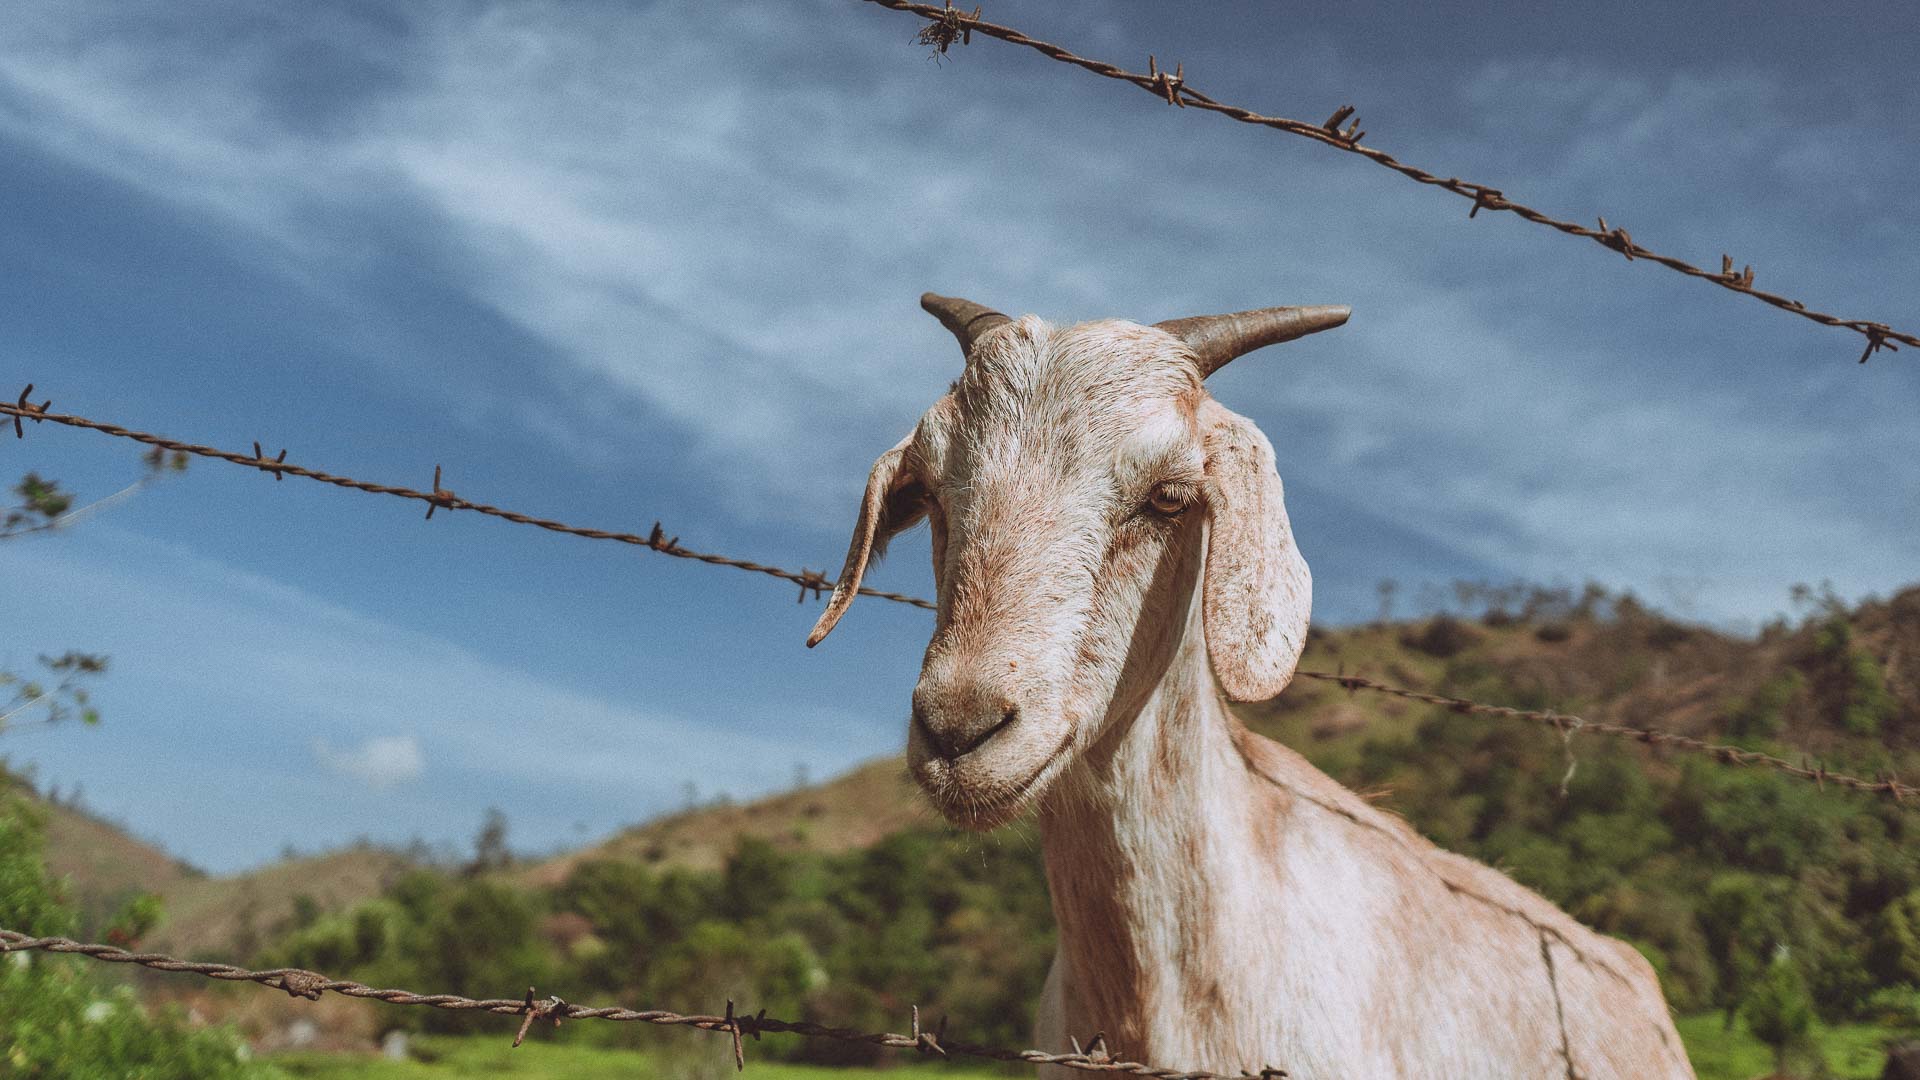 Goat in Wire